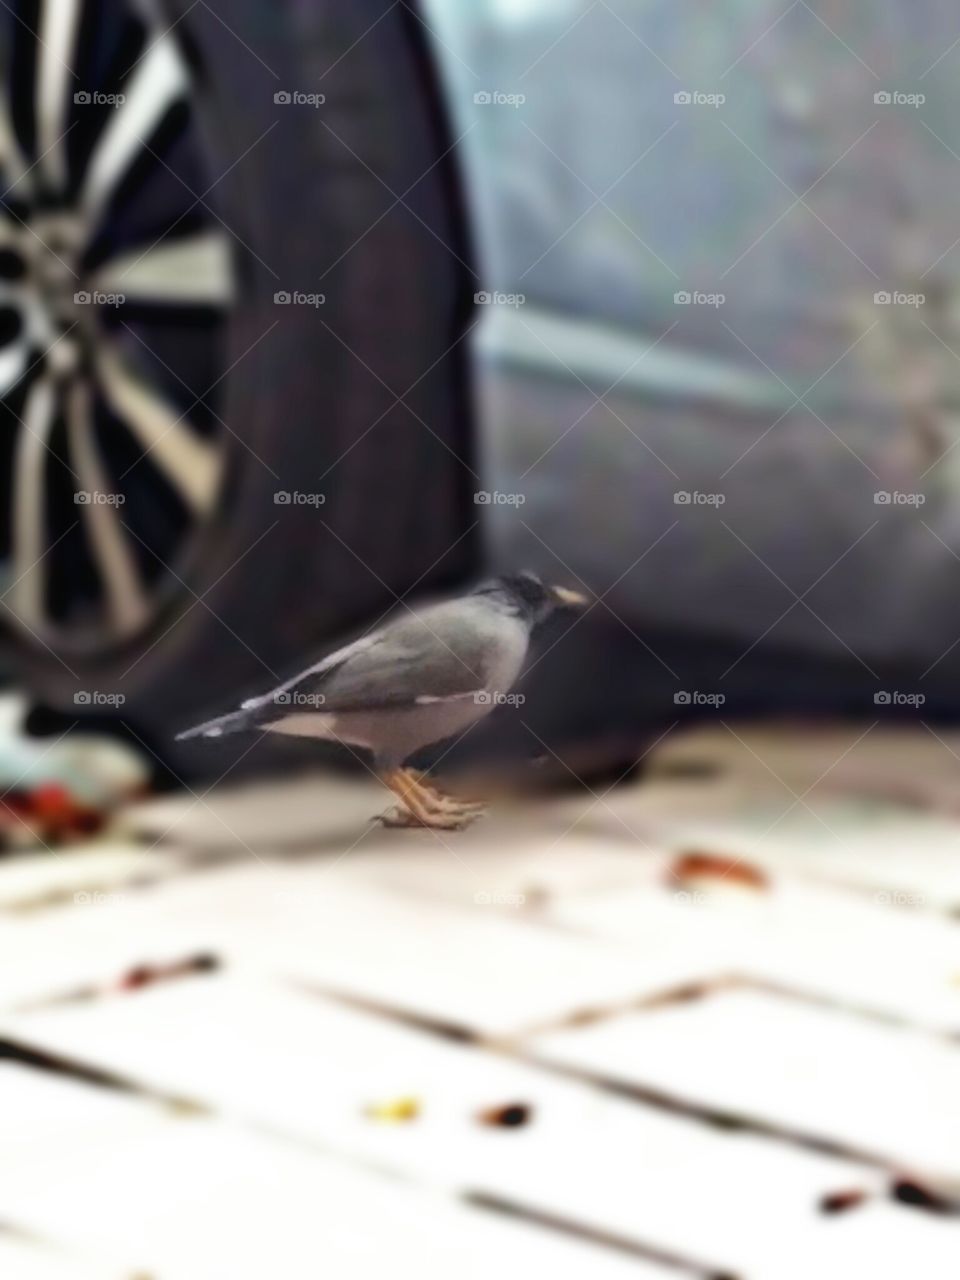 Capturing Bird In The Frame Of Camera